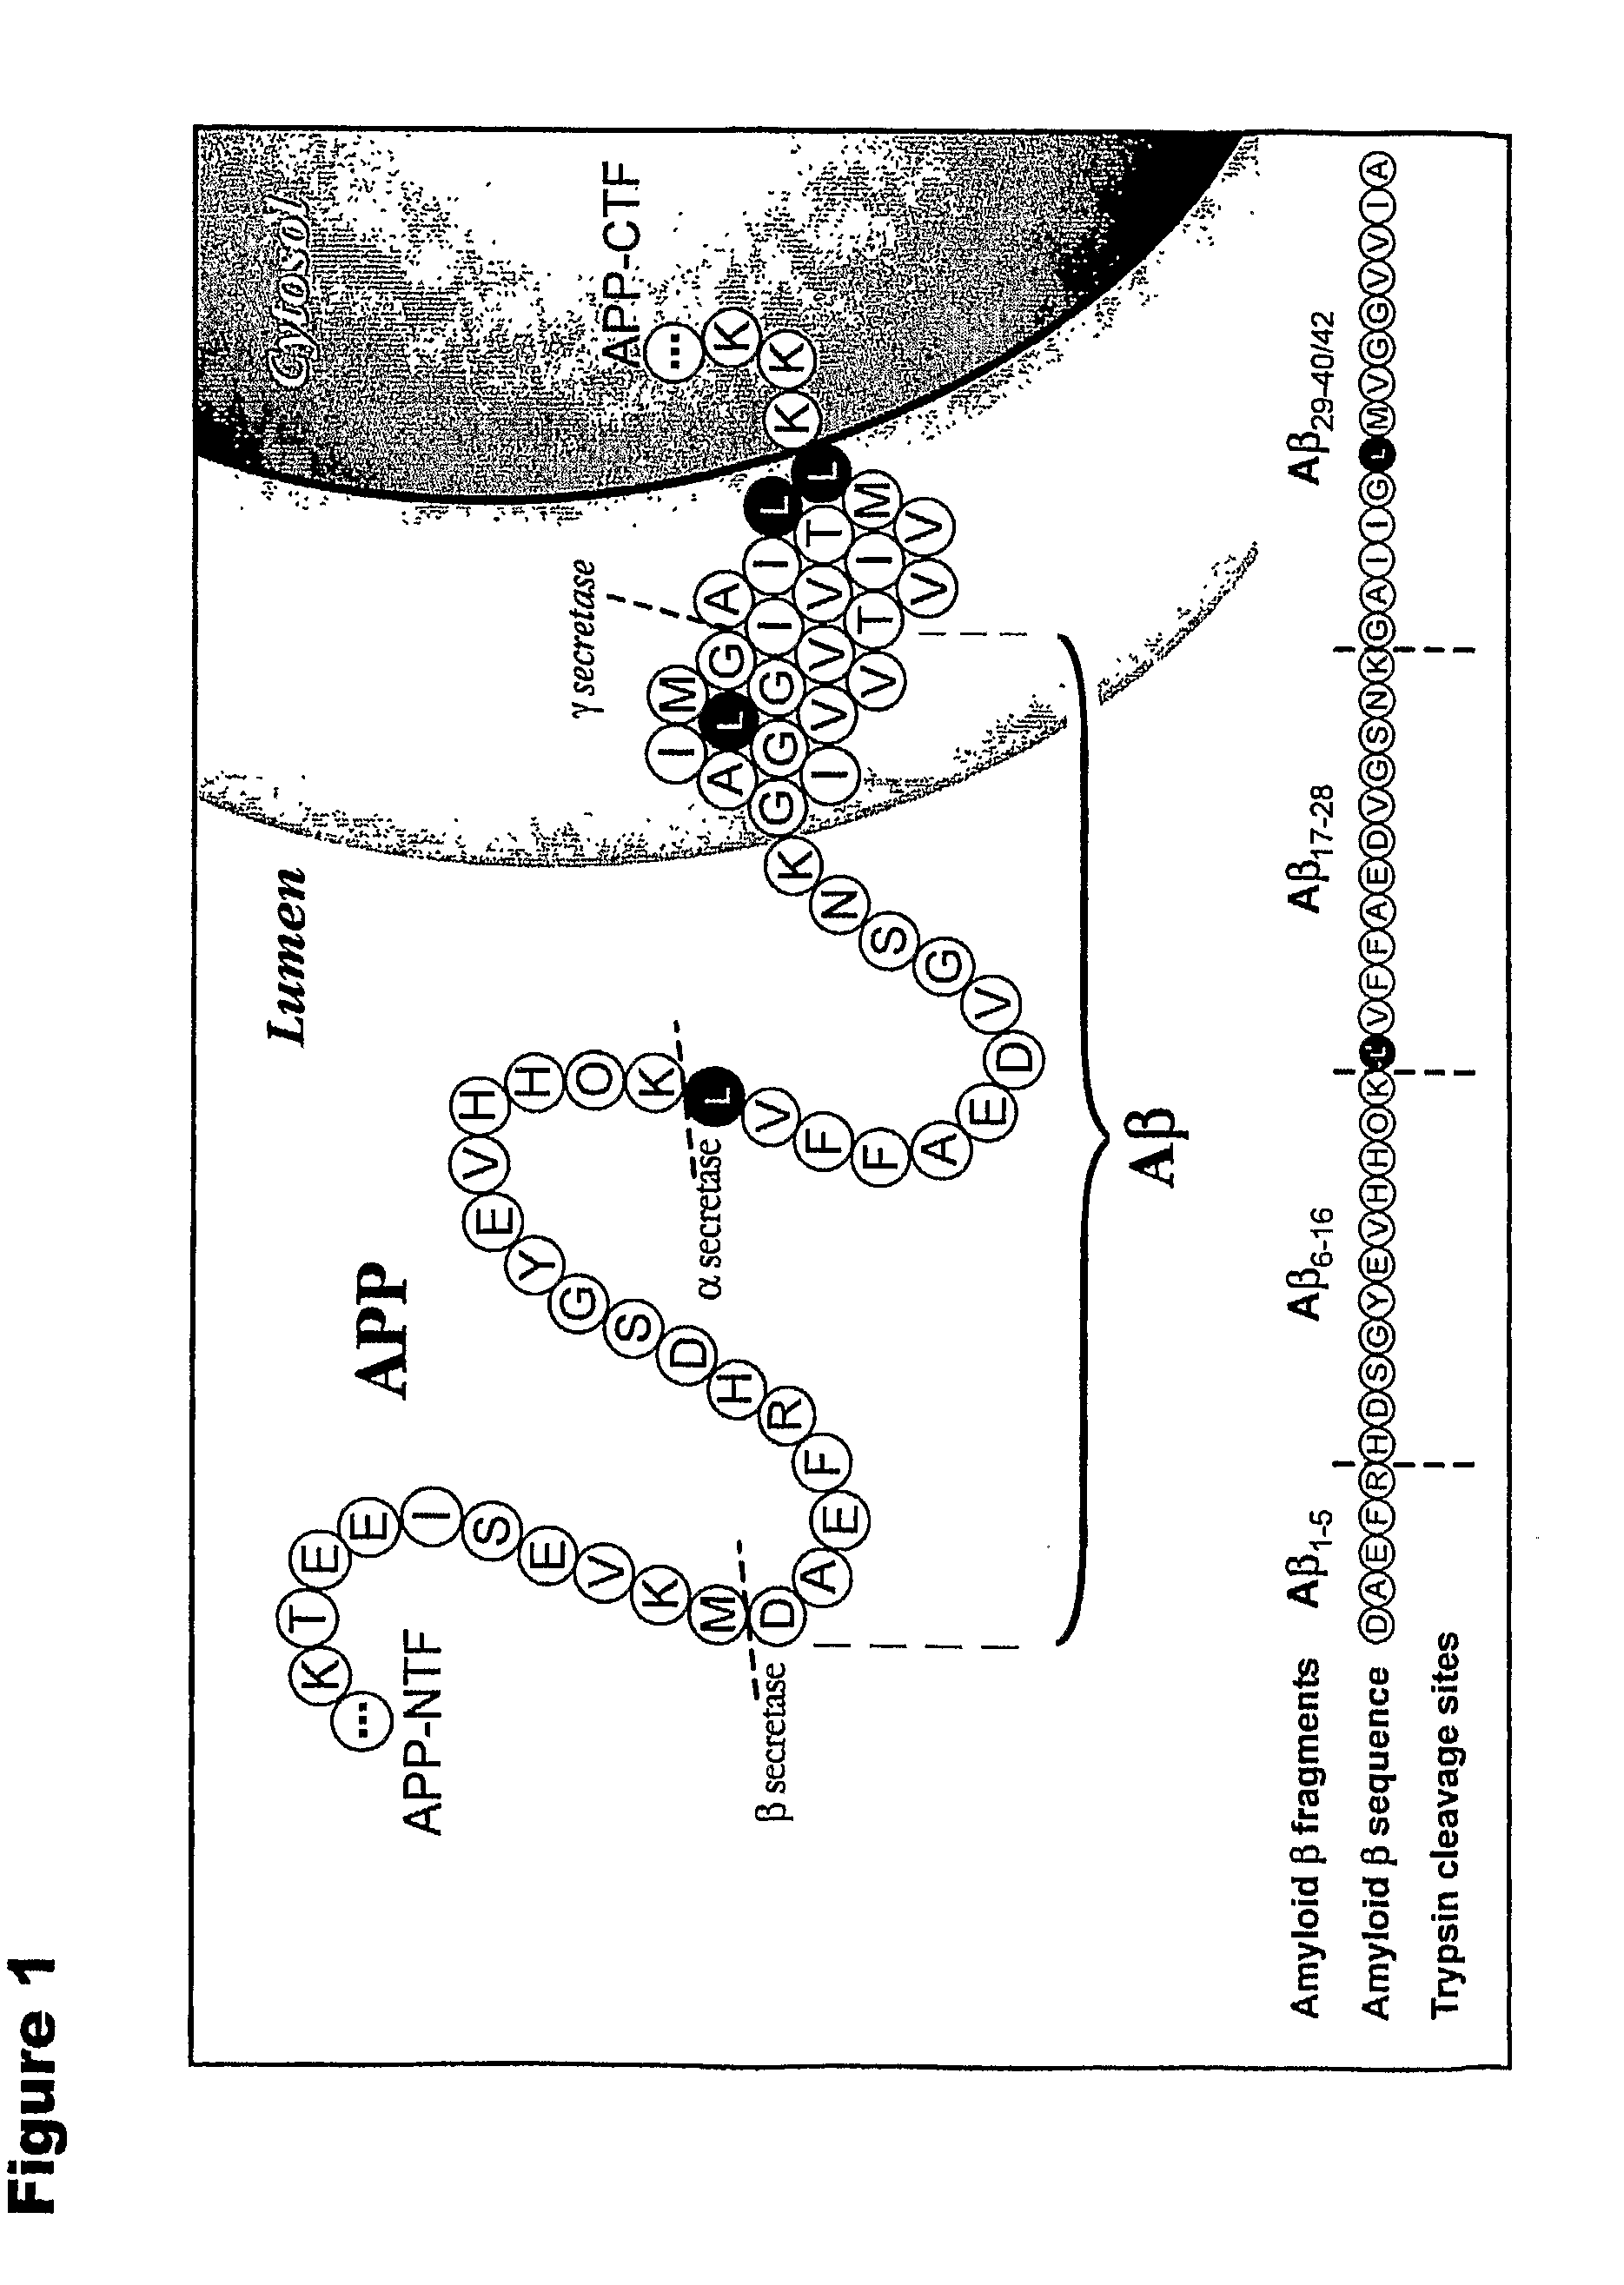 Methods for Measuring the Metabolism of Neurally Dervied Biomolecules in Vivo